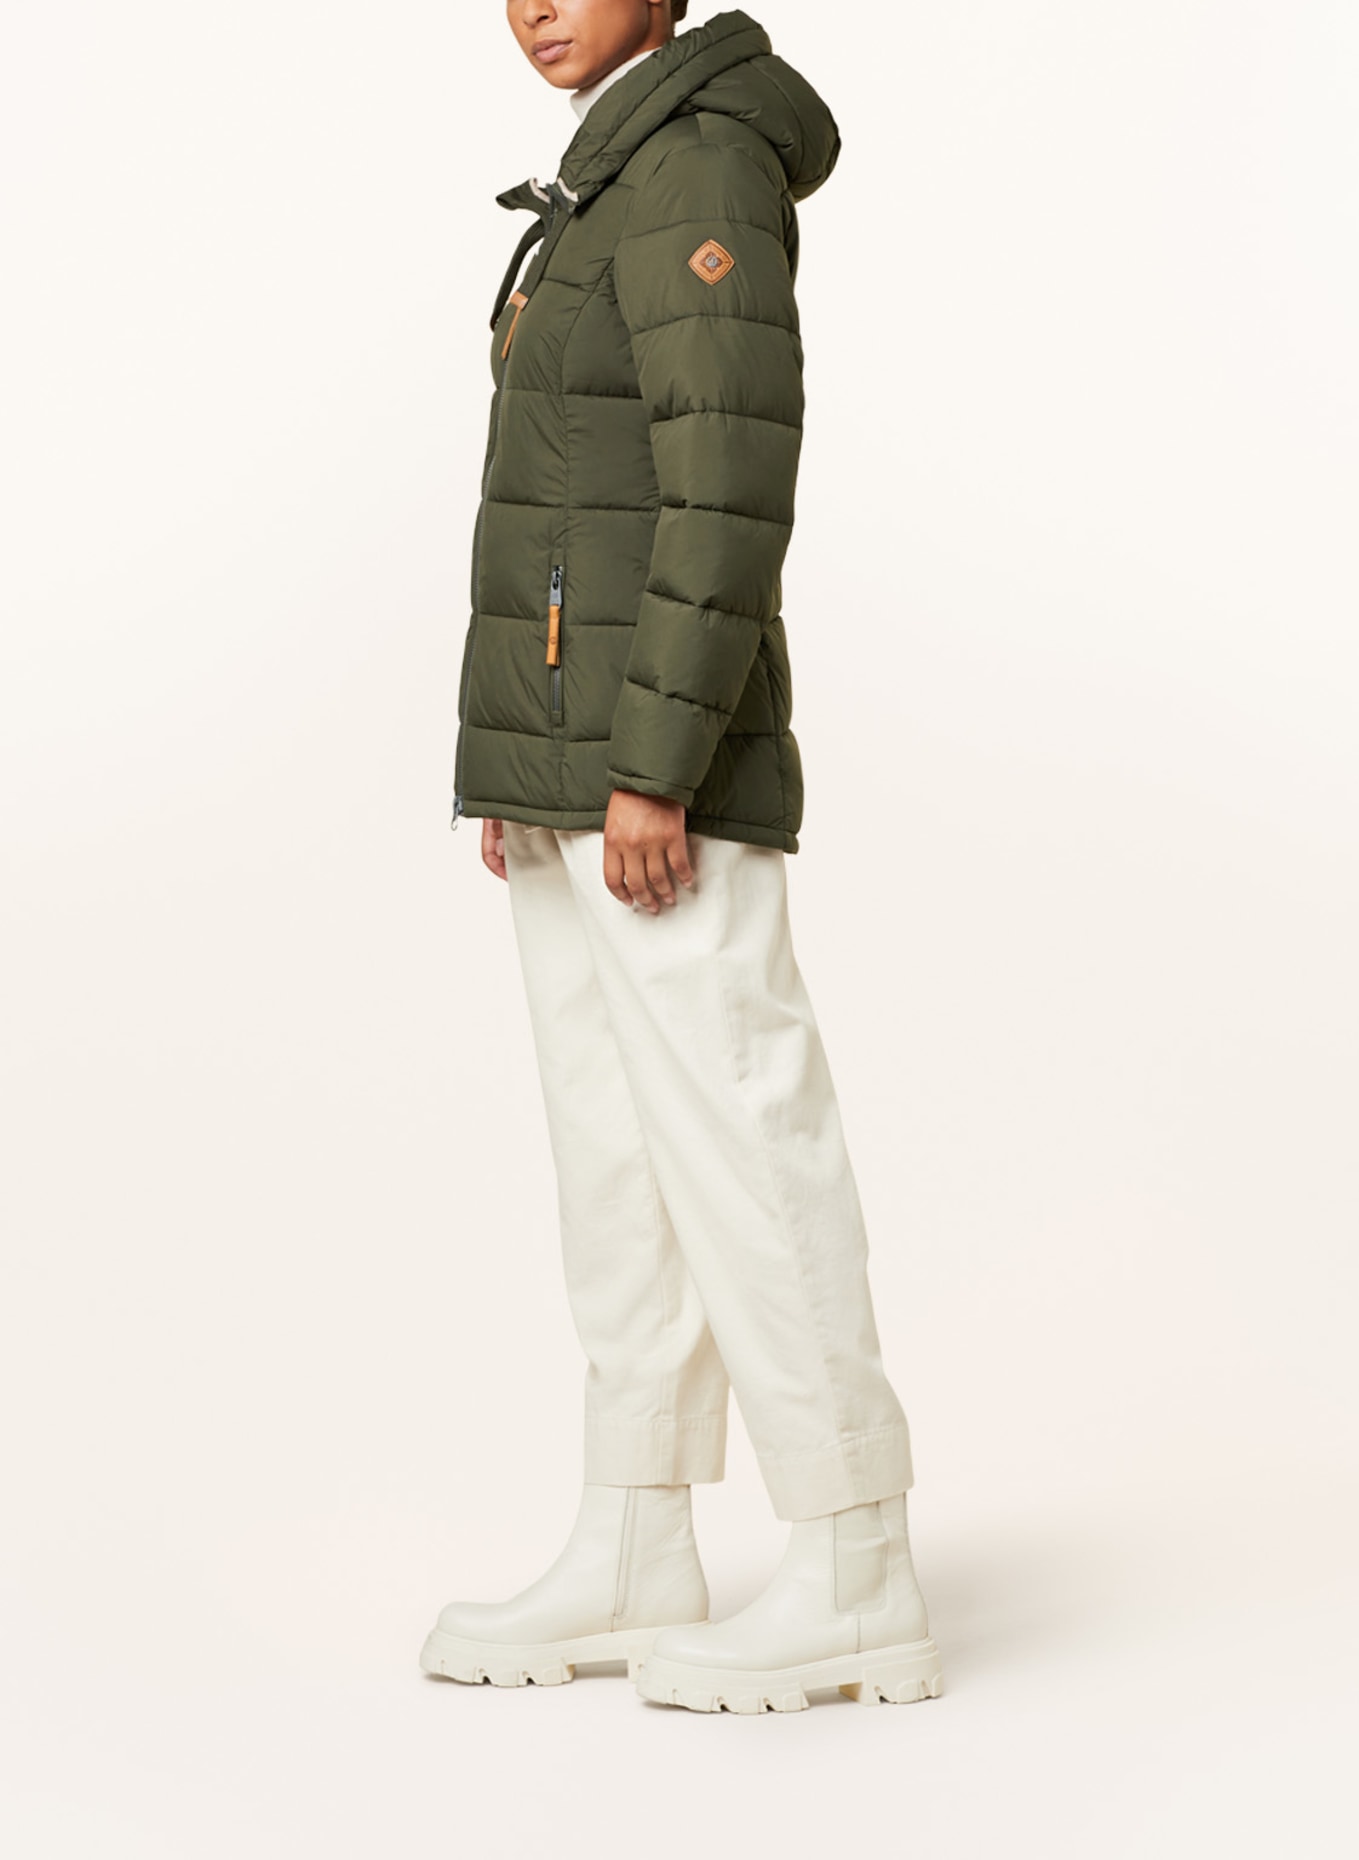 jacket DX G.I.G.A. by Quilted olive killtec in